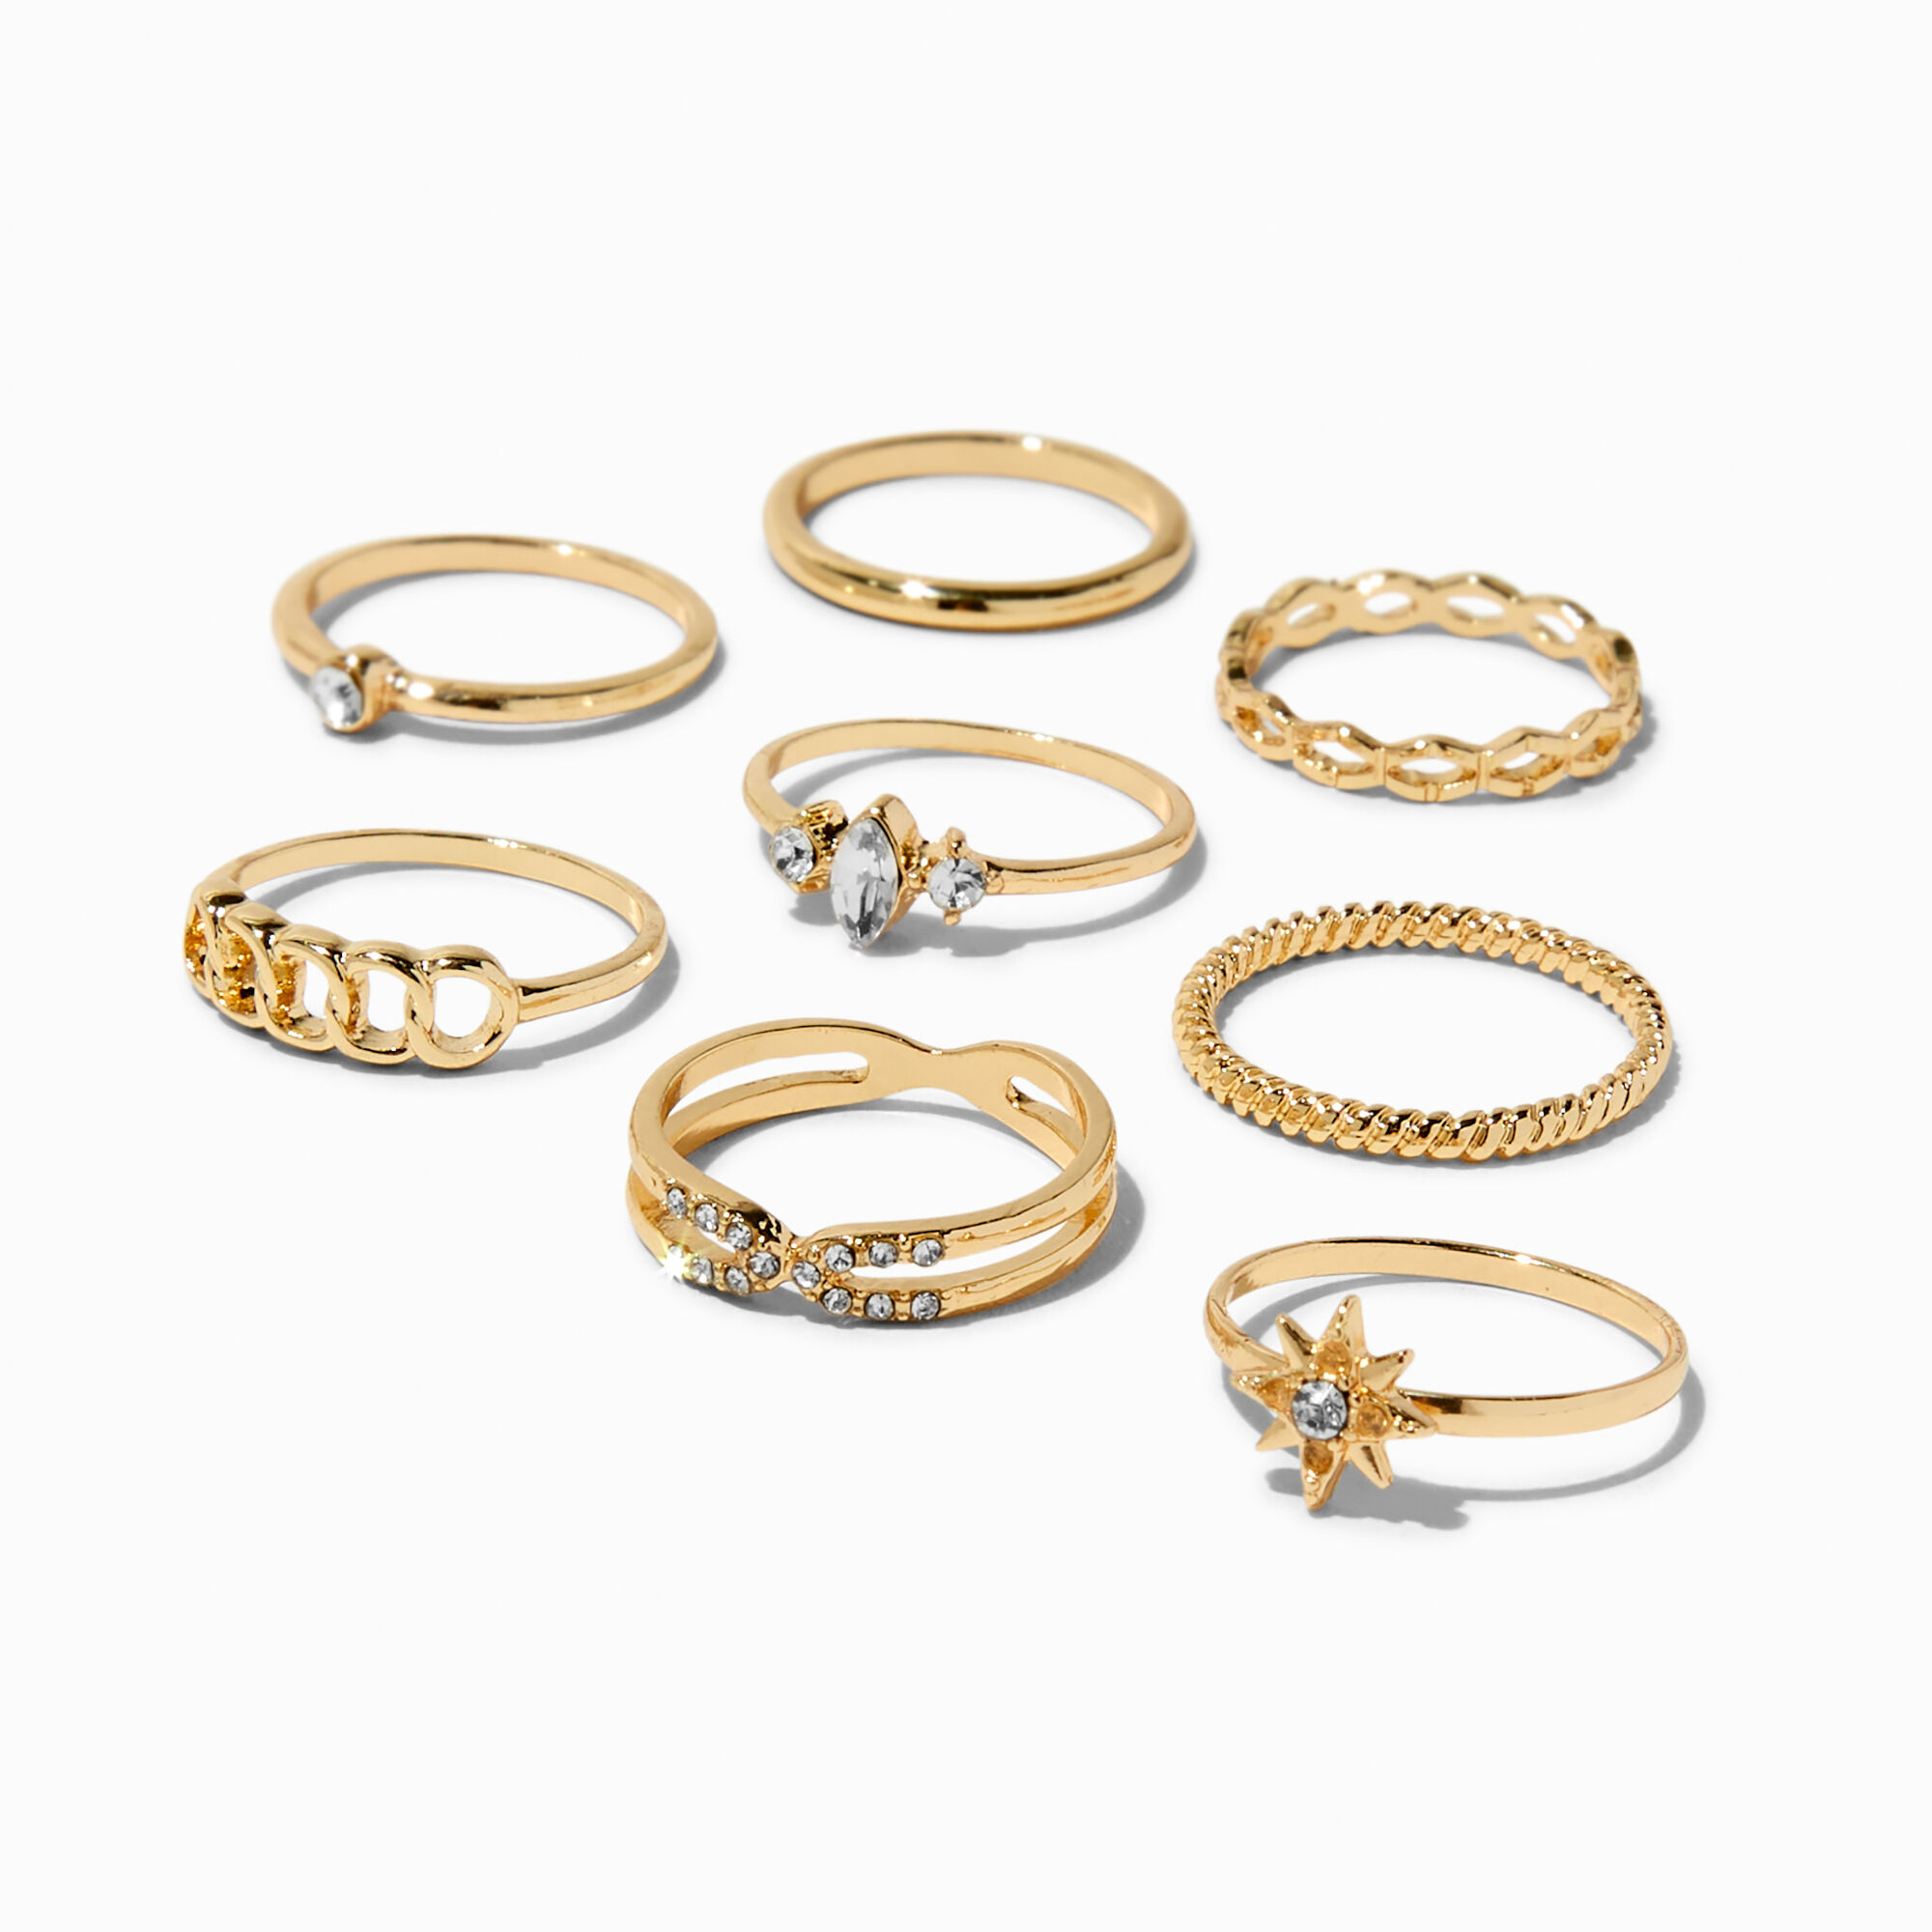 View Claires Tone Geometric Celestial Ring Set 8 Pack Gold information